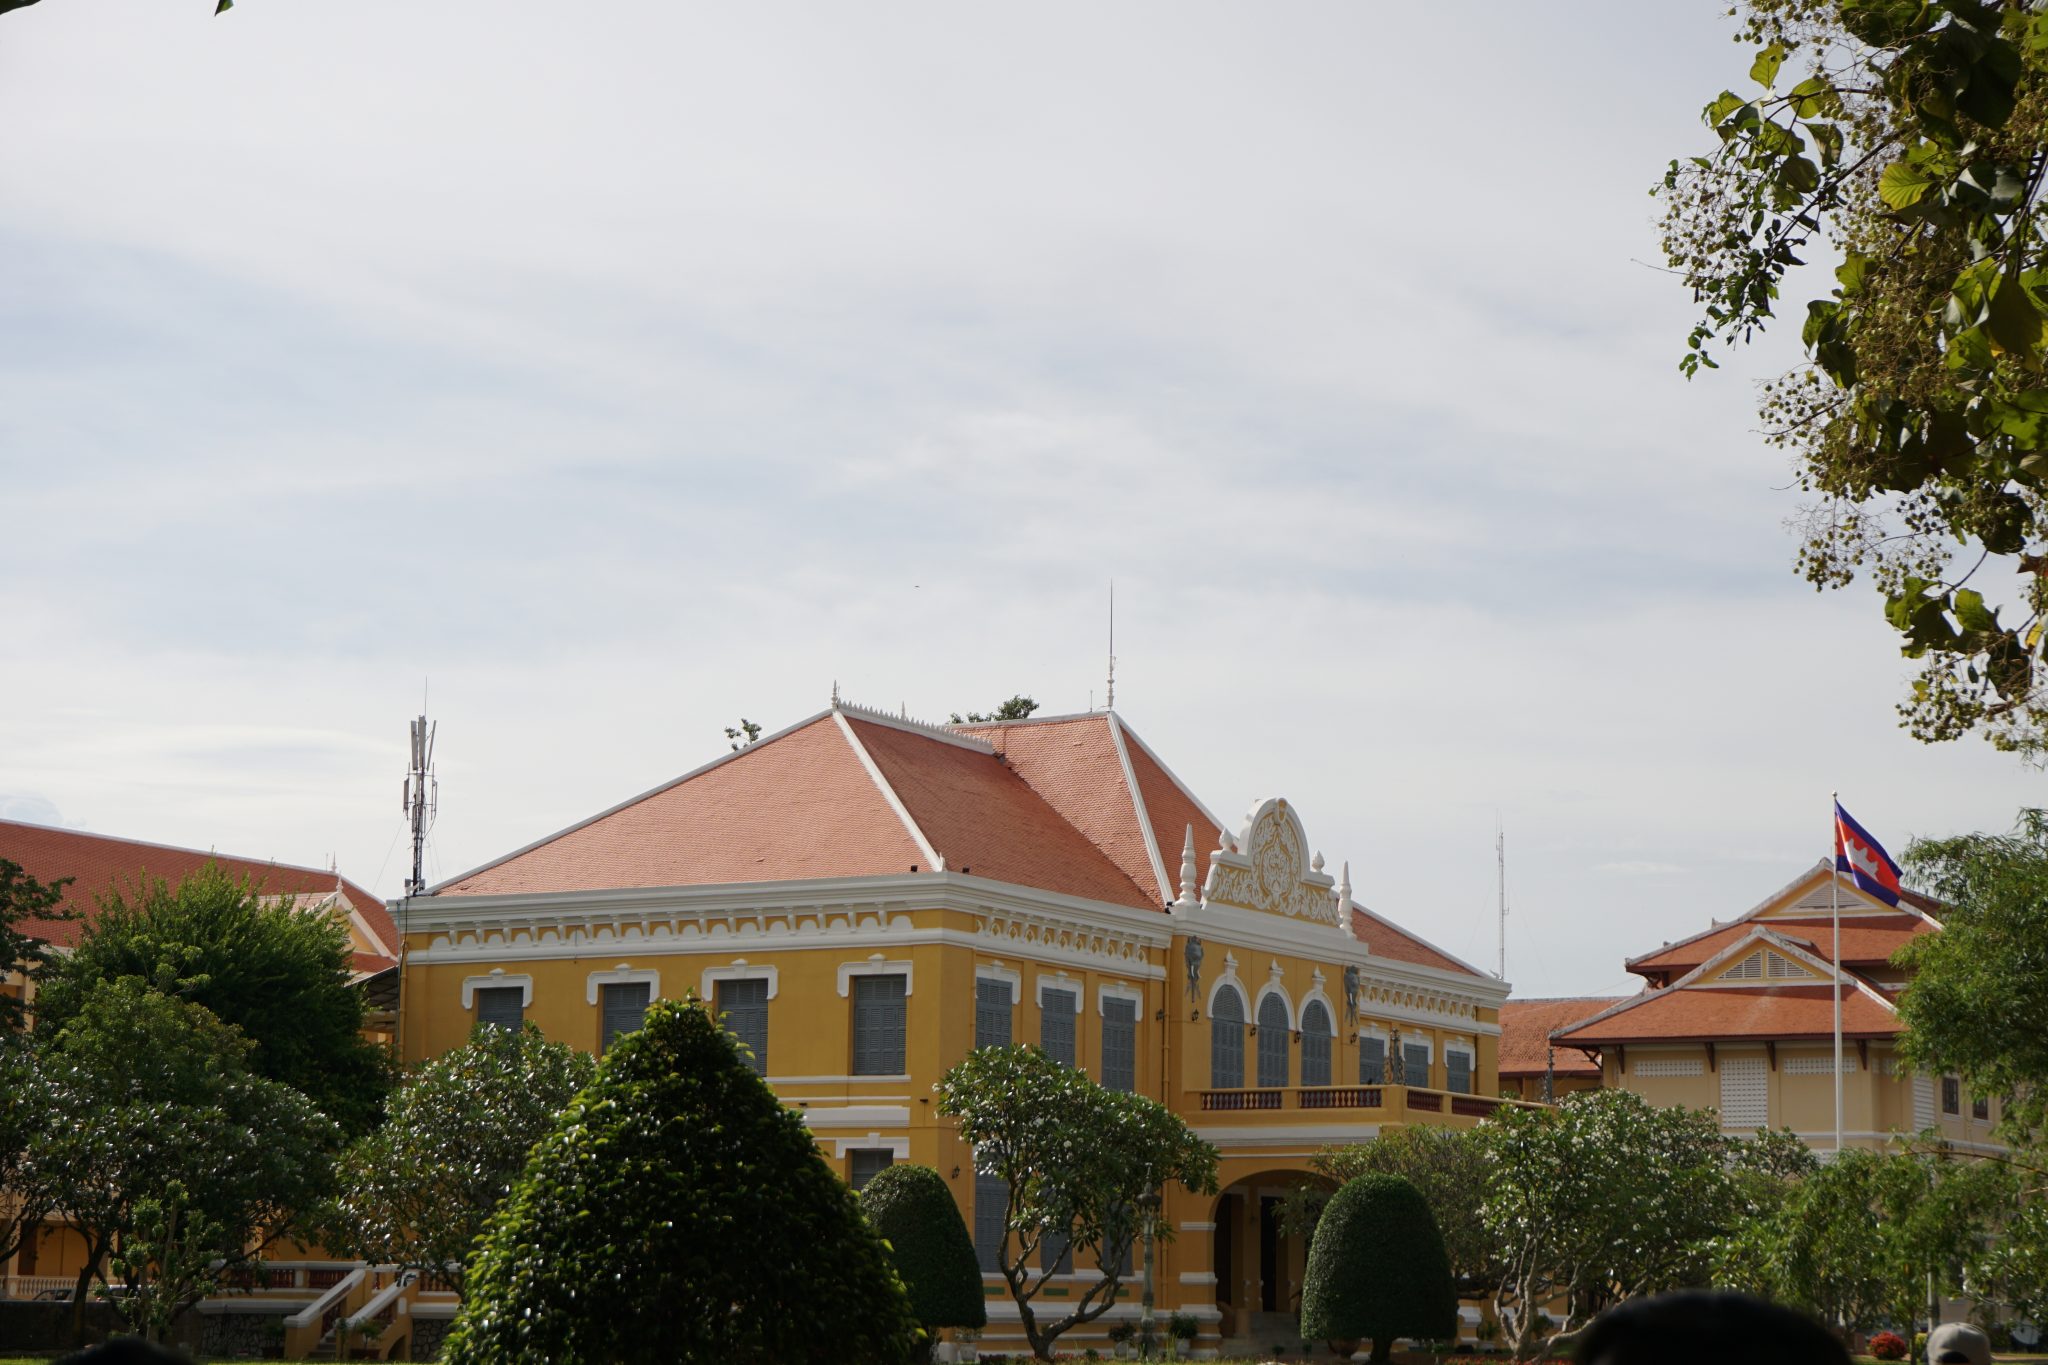 The Sala Khaet remains a highlight of Battambang’s stock of surprisingly well-preserved colonial architecture. Visit SoutheastAsia.